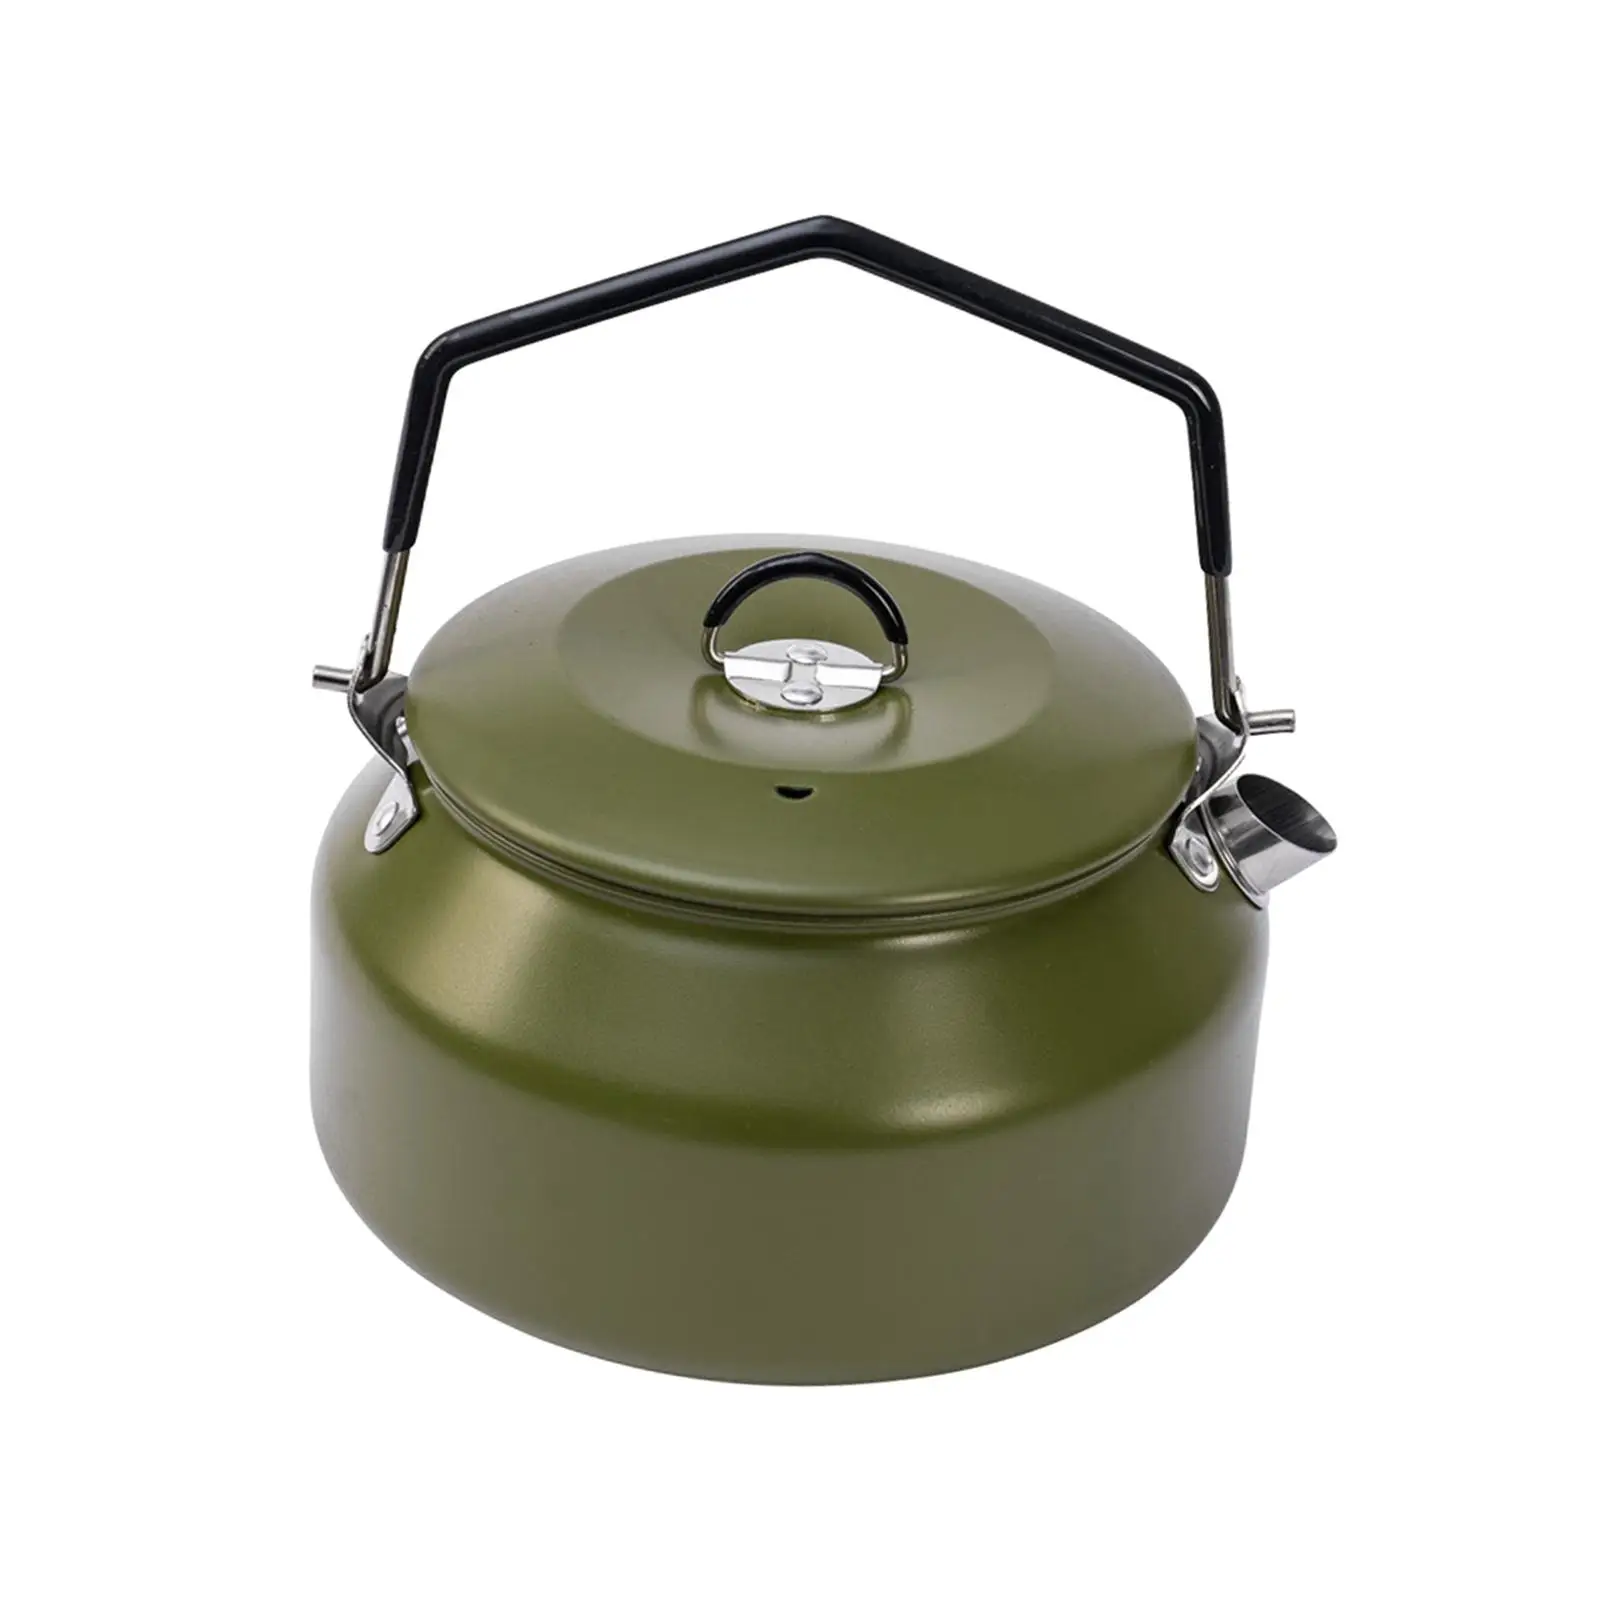 Camping Water Kettle Teapot Kitchen Stainless Steel Pot Lightweight Tea Pot for Barbecue Backpacking Outdoor Hiking Fishing